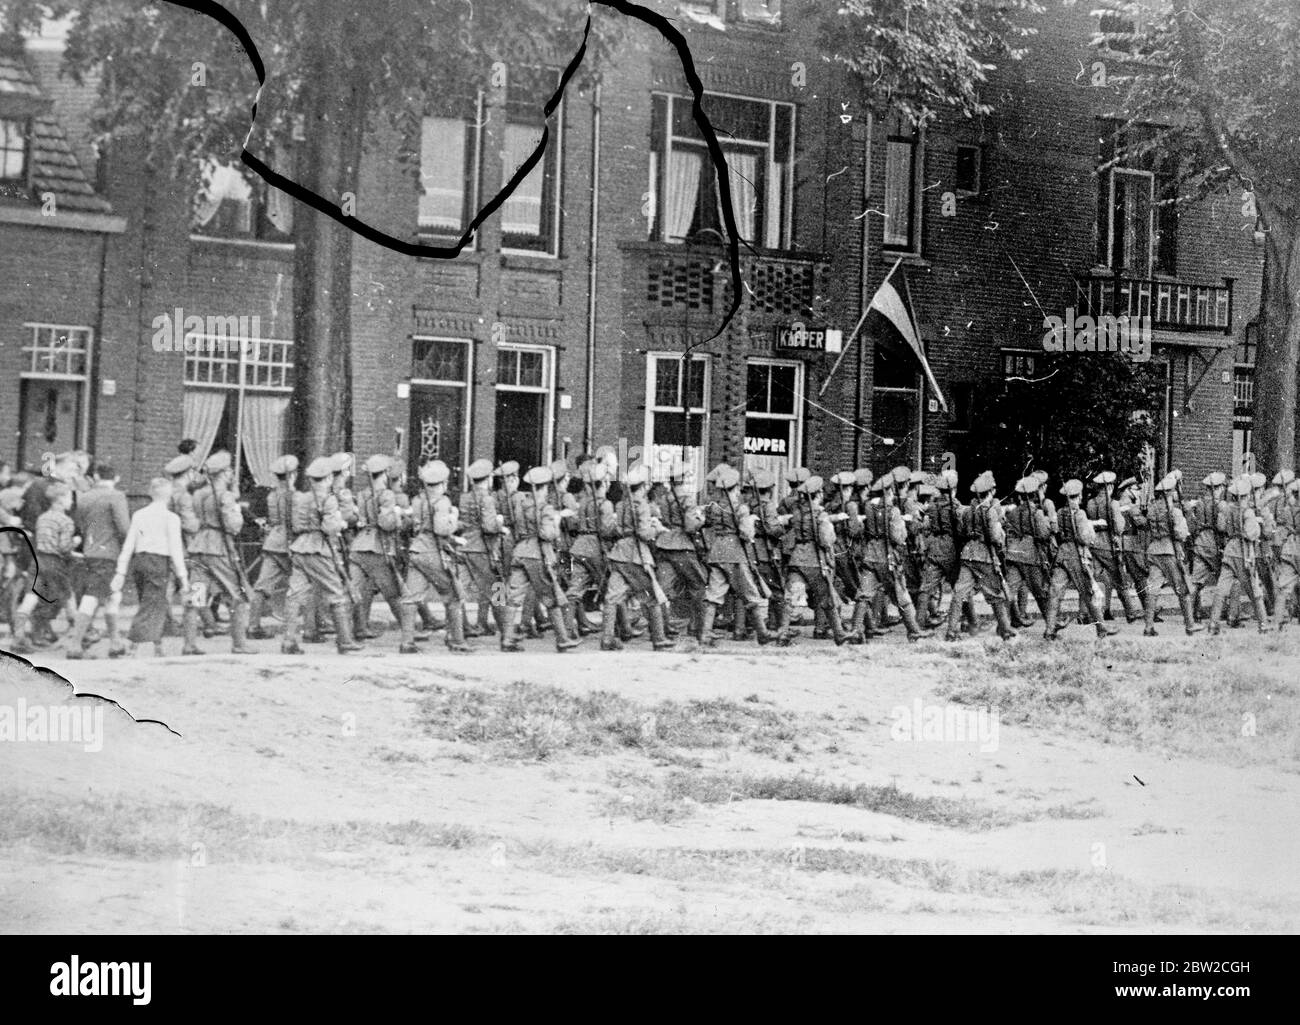 Holland mobilised to protect neutrality. In a Europe in which hostilities have already broken out, all Holland's forces are mobilised for the purpose of ensuring the country's neutrality in a general conflict. Troops followed by town folk as they marched through Nijmegen, a Dutch border town lying between the Rhine and Germany and scarcely a mile from German territory. 2 September 1939 Stock Photo